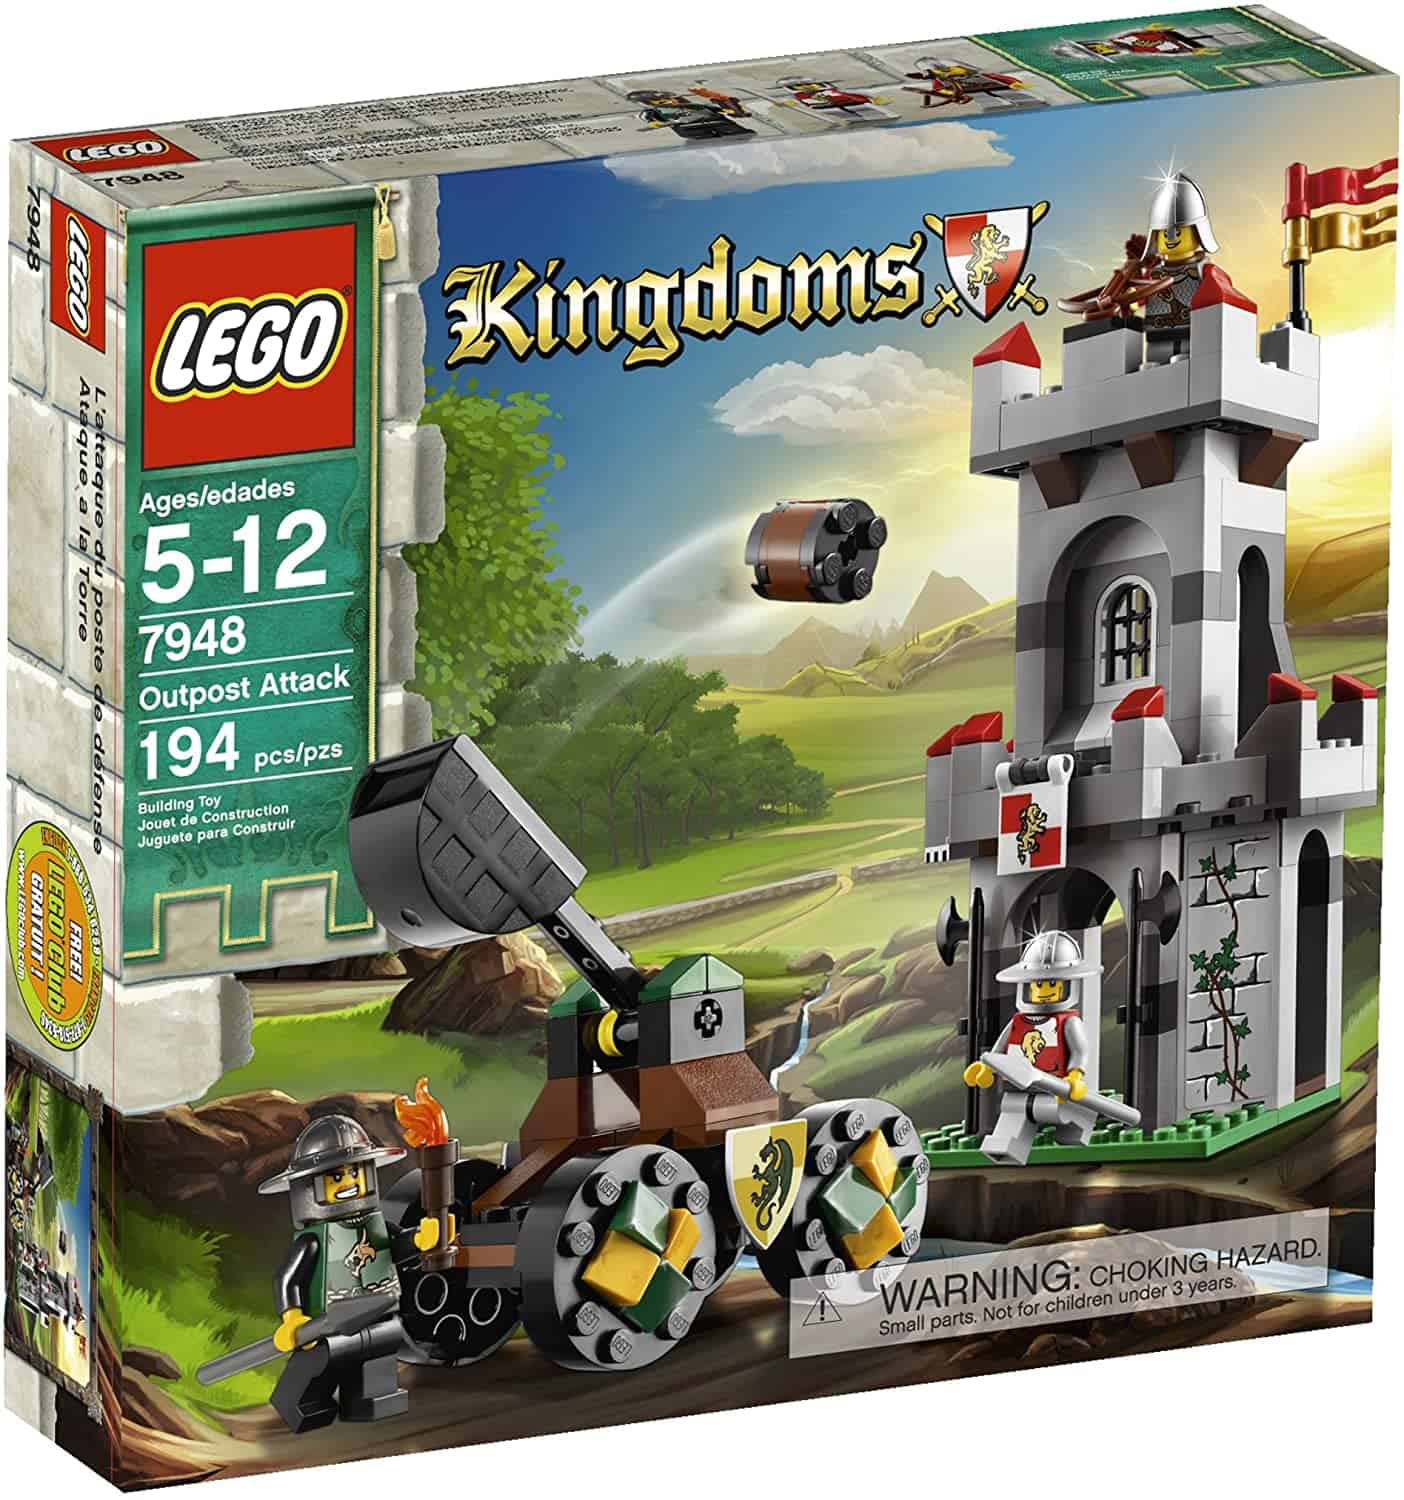 Best Lego Kingdoms castle: LEGO Kingdoms Attack On The Lookout Tower 7948